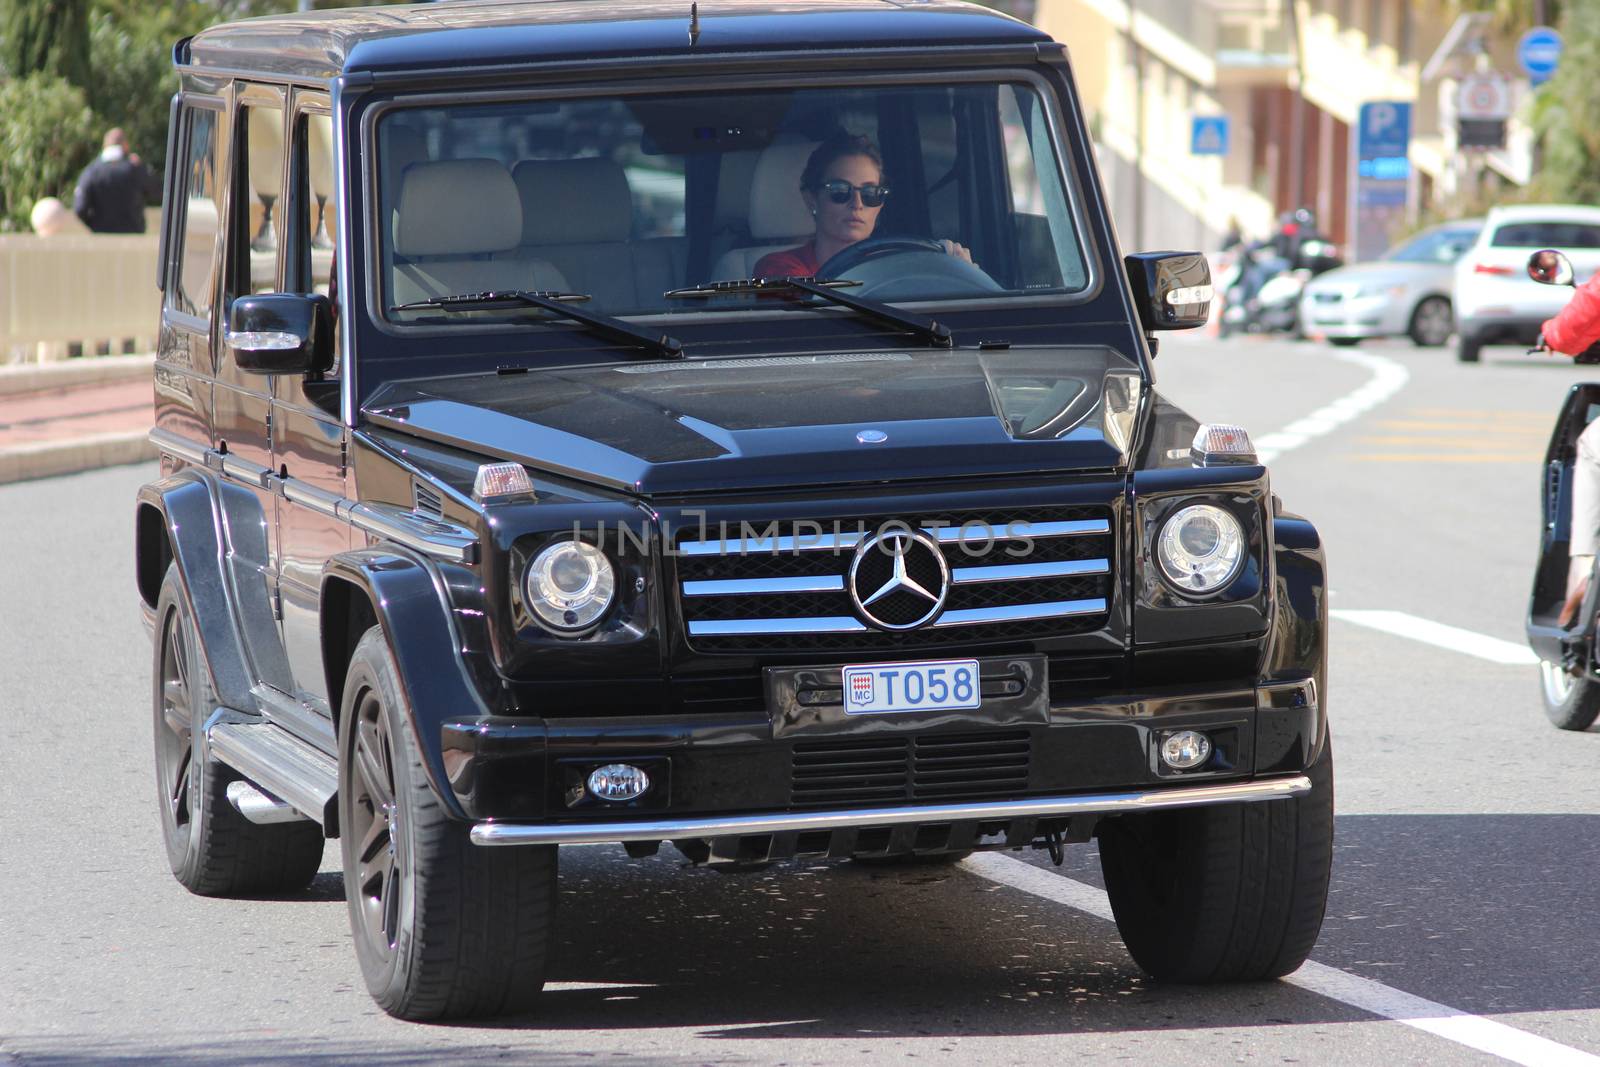 Monte-Carlo, Monaco - March 9, 2016: Mercedes AMG G 65 on Avenue d'Ostende in Monaco. Beautiful Young Woman Driving an Expensive Black SUV in the south of France